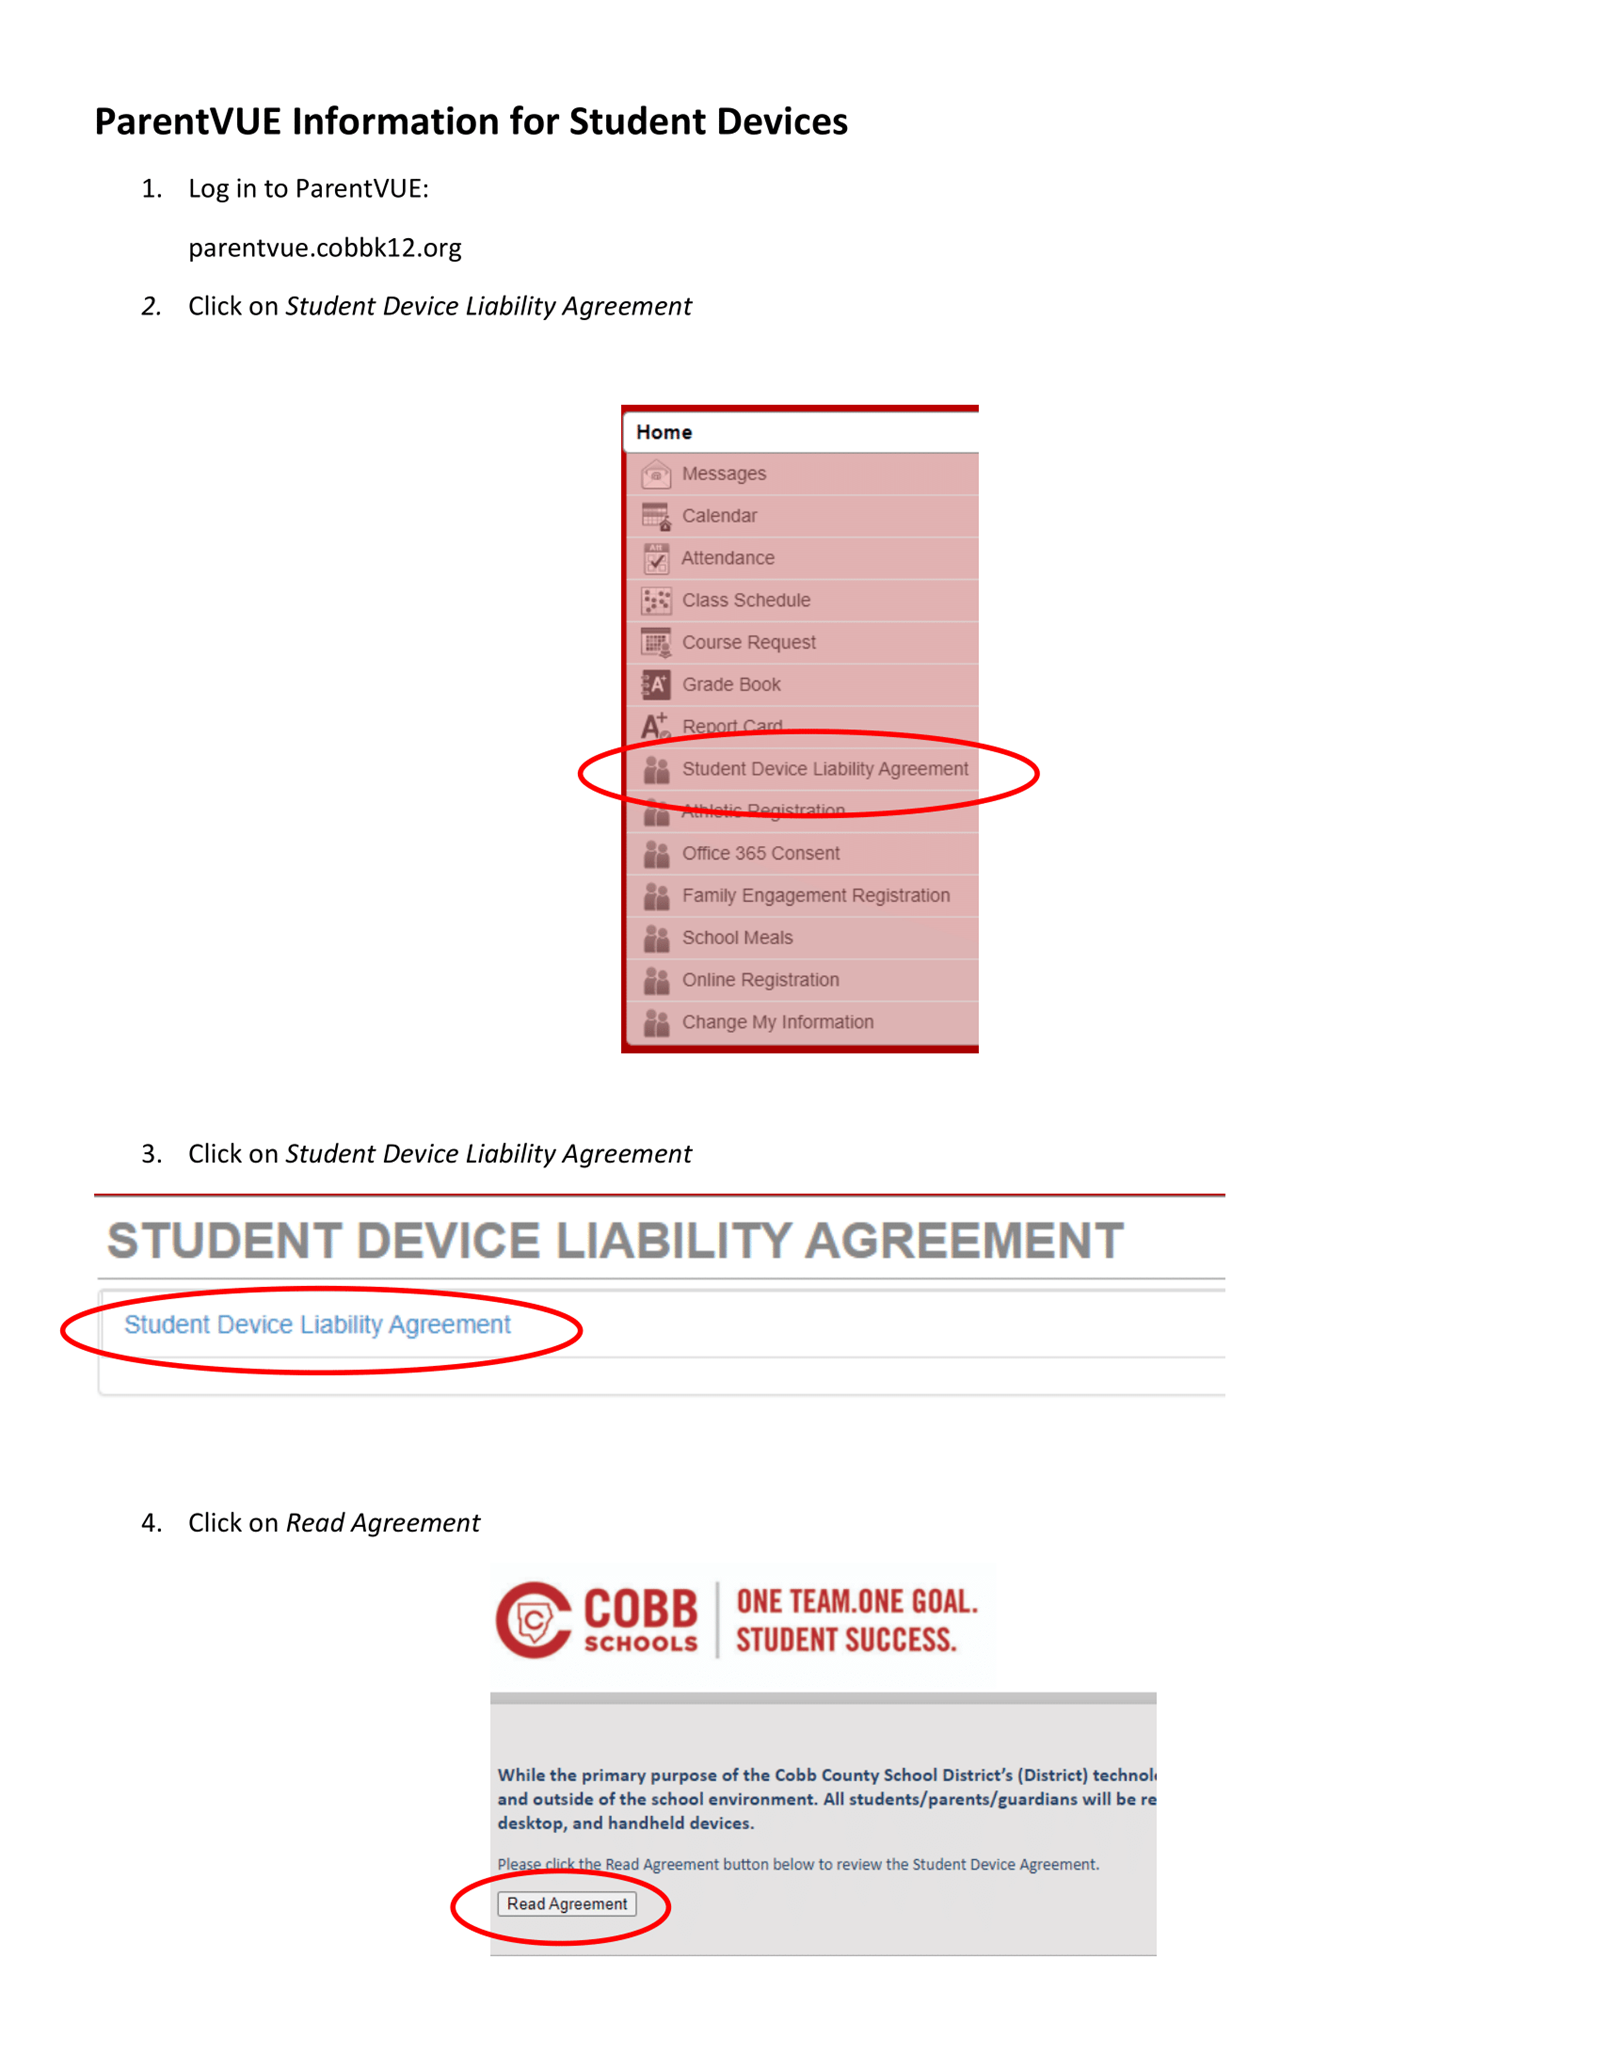 How to opt-in for a student device: